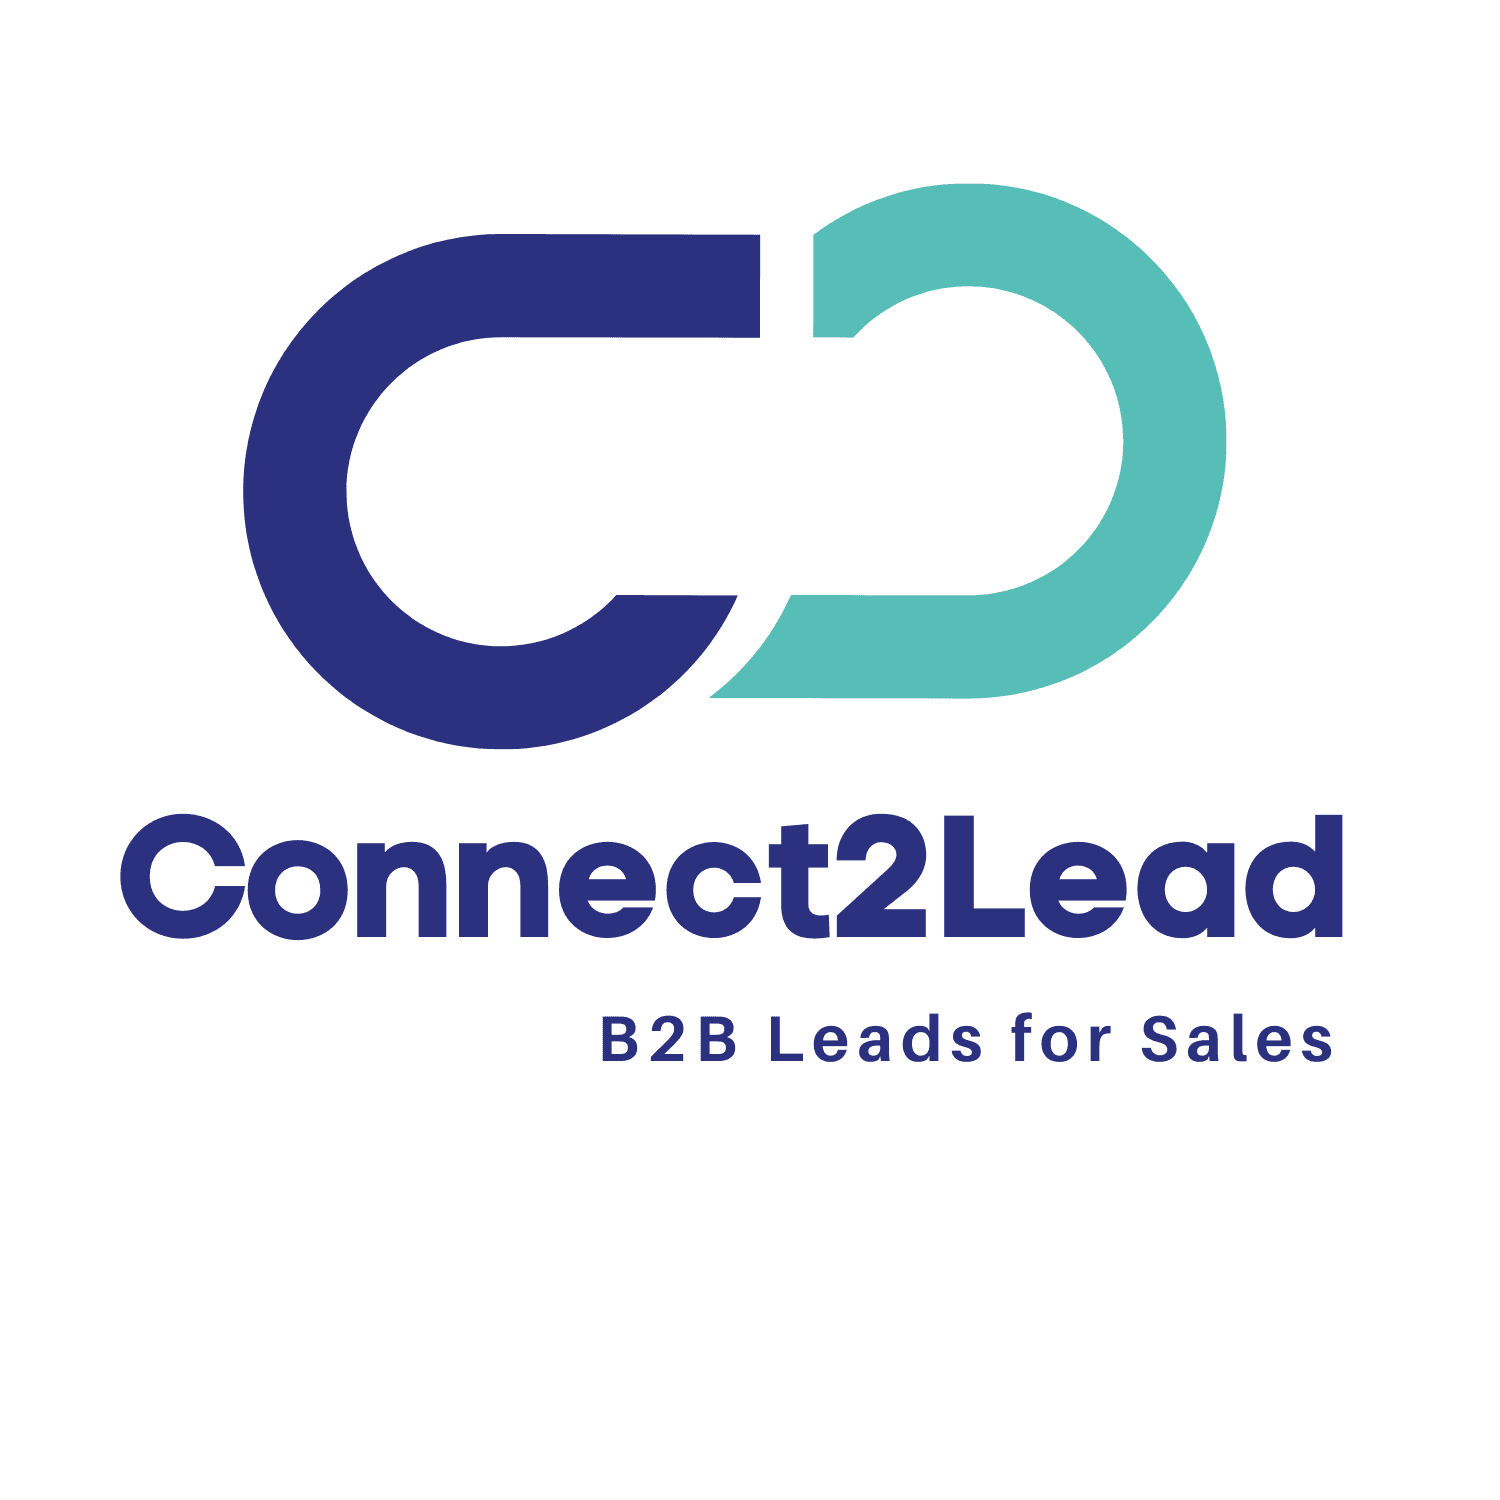 Connect2Lead